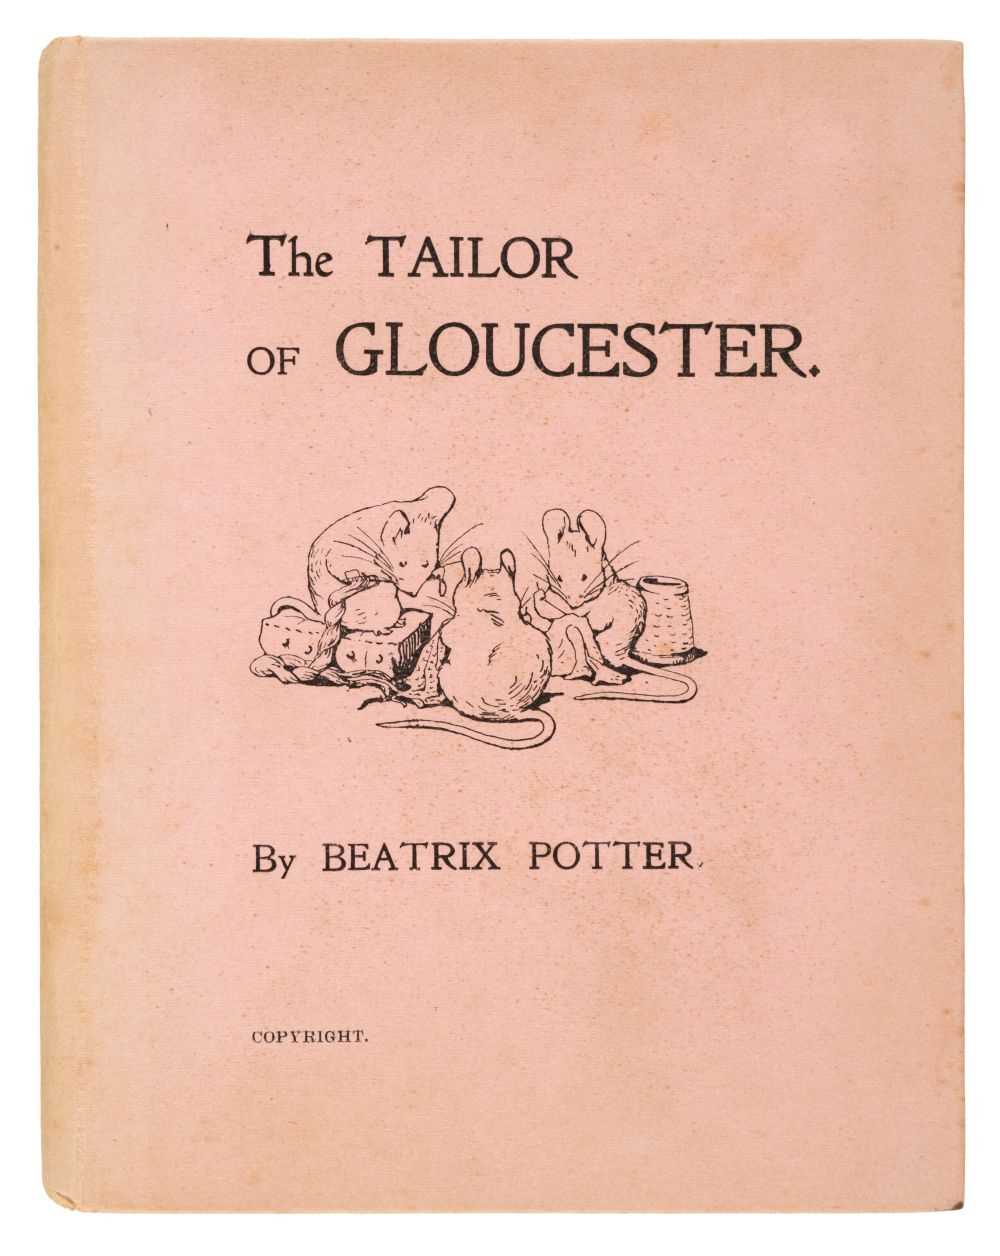 Lot 702 - Potter (Beatrix). The Tailor of Gloucester, 1st privately printed edition, [Strangeways], 1902